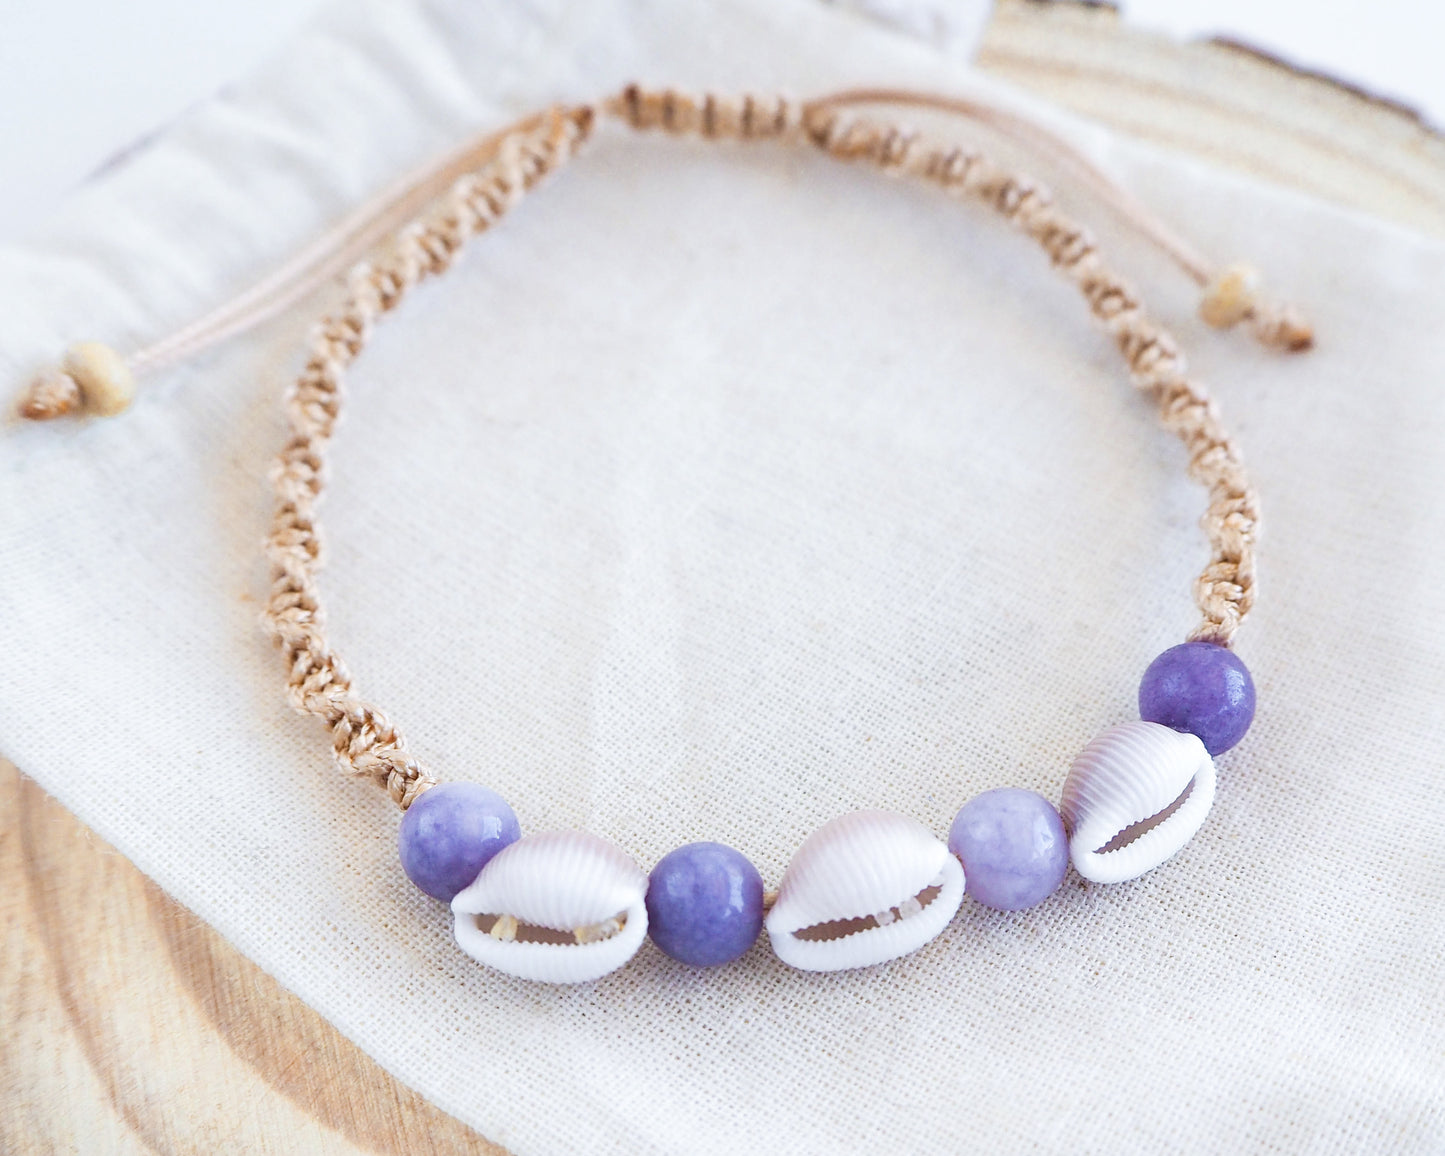 Real Cowrie Shell Bracelet with Amethyst Beads, beaded wax cord, kauri from Portugal, Shells from Algarve, jewelry